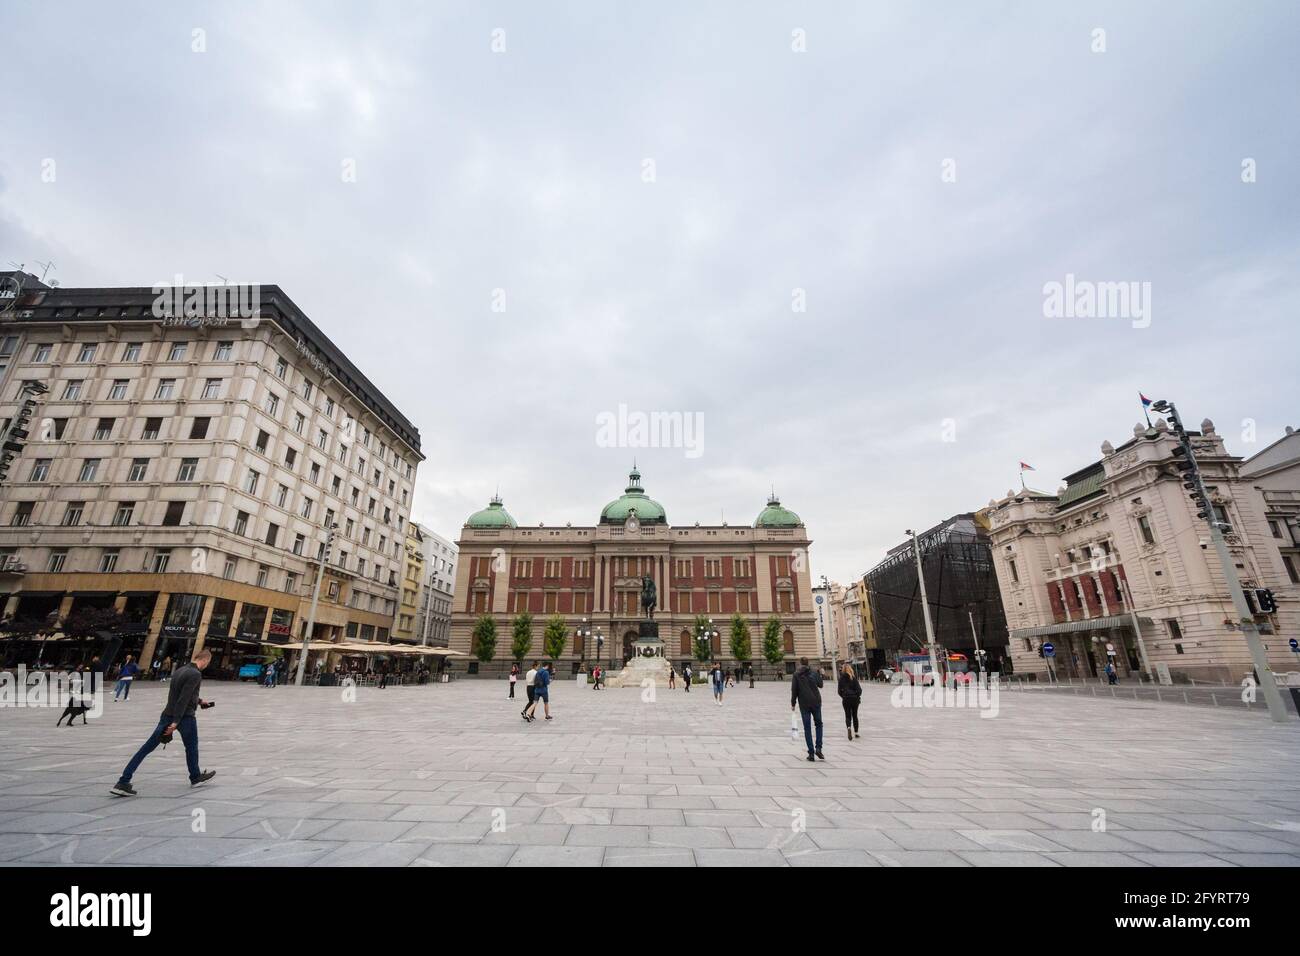 BELGRADE, SERBIA - JUNE 21, 2020: Speople rushing on Trg Republike in the afternoon with Prince Mihailo (Knez Mihailo) statue and National Museum,  wh Stock Photo